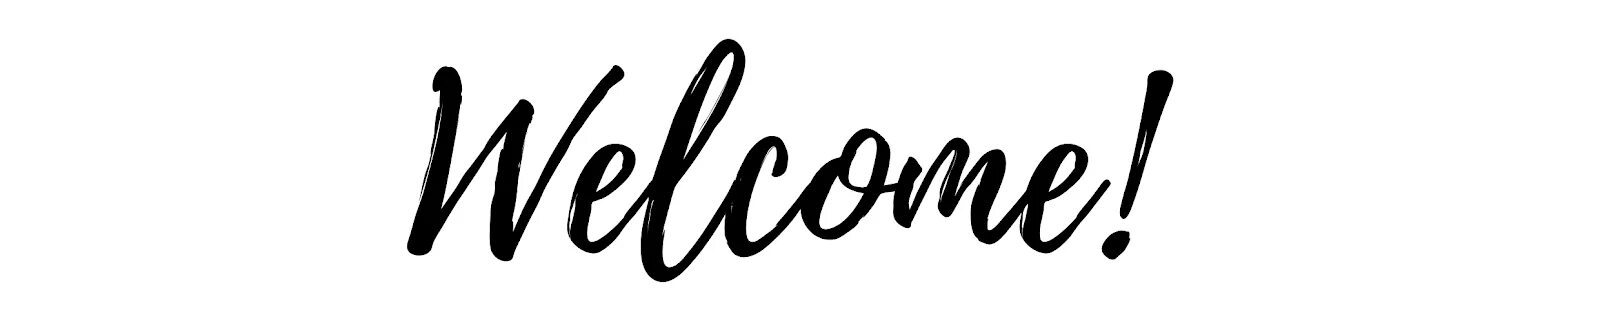 Welcome. Welcome font. Горизонтальный Welcome. Welcome горизонтально. Welcoming meaning